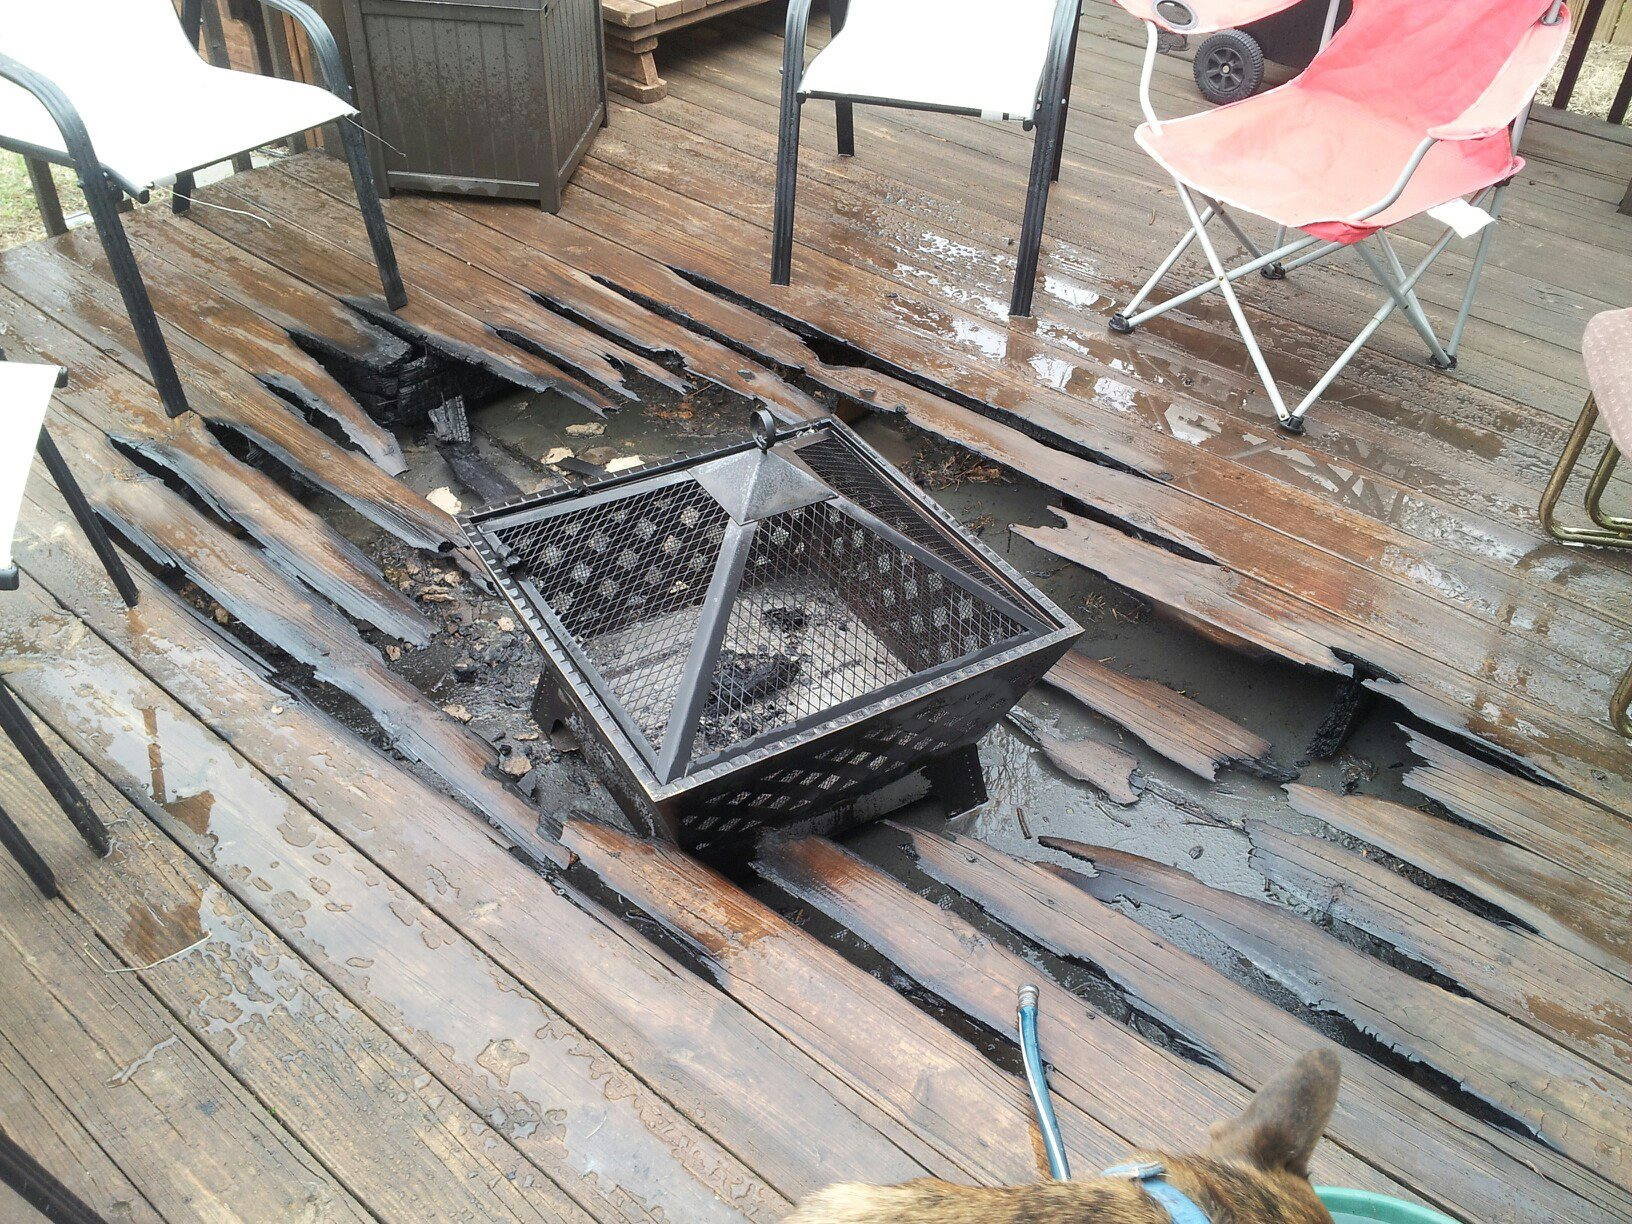 Ill Just Put This Fire Pit On A Wooden Floor Wcgw X Post From R with regard to size 1632 X 1224